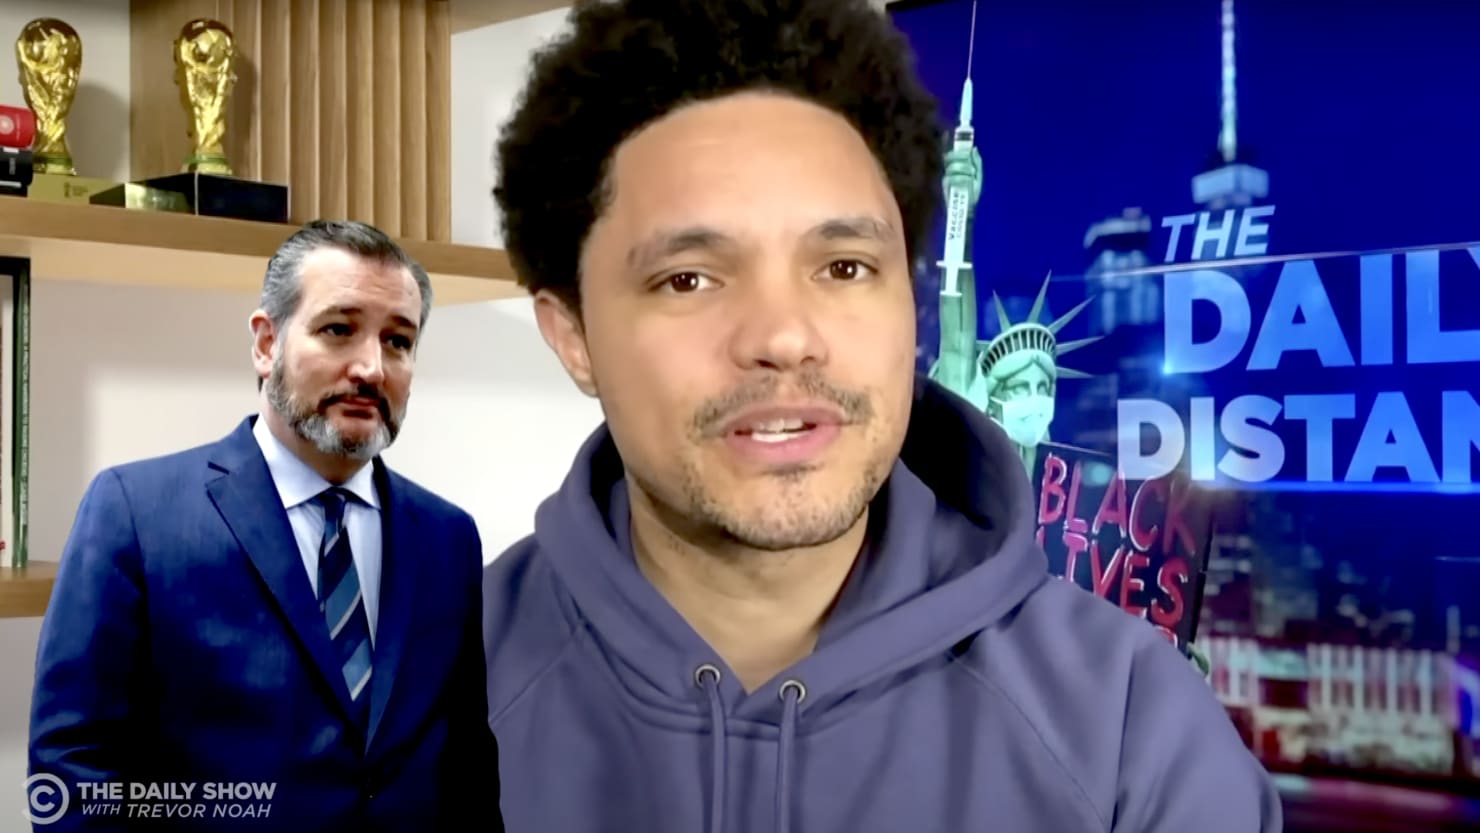 Trevor Noah leaves with Shameless Texas Photo Op by Ted Cruz